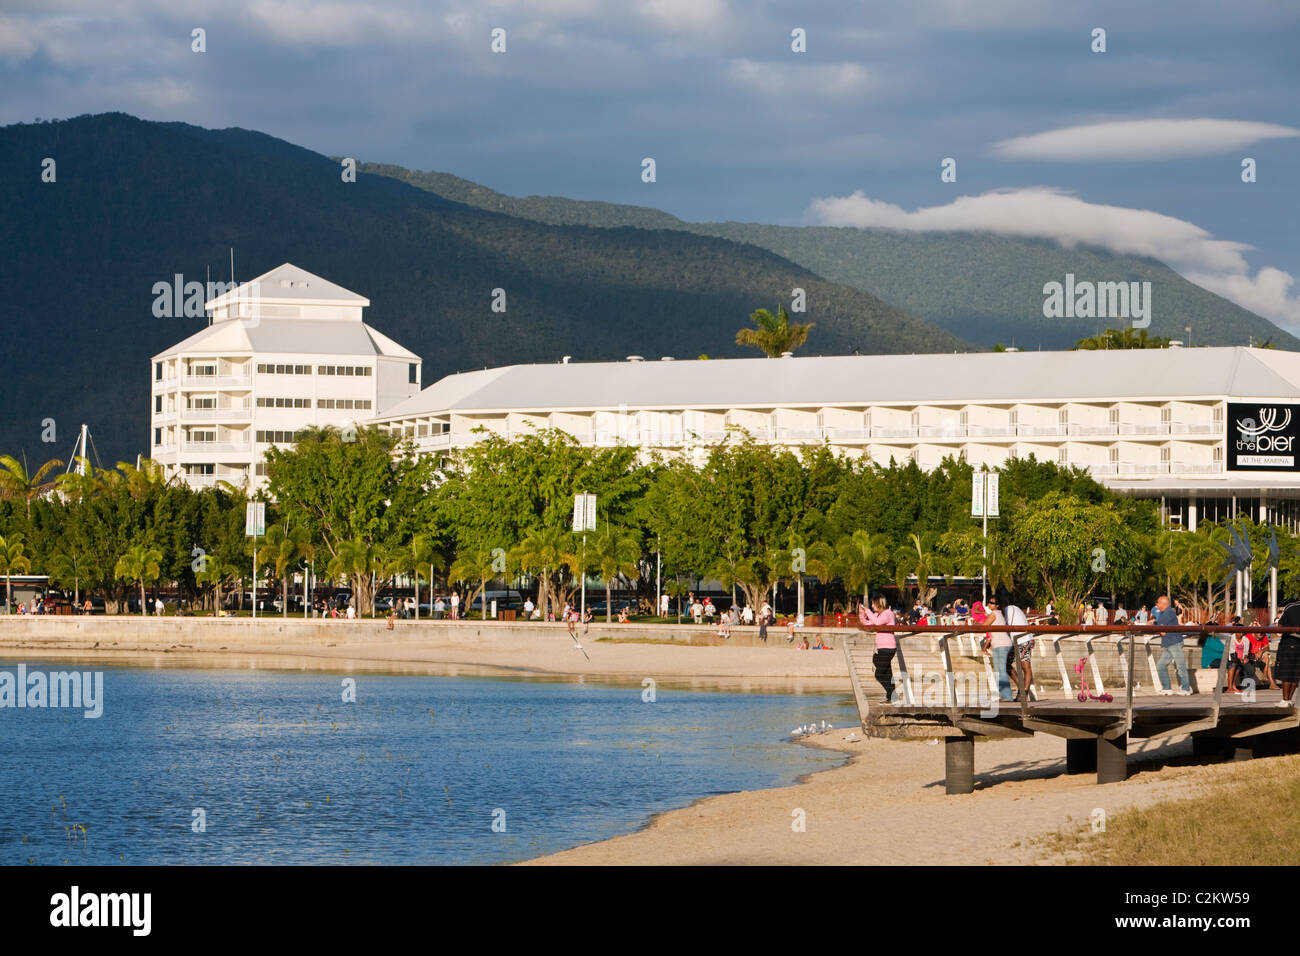 View along Esplanade with The Pier at the Marina in background. Cairns, Queensland, Australia Stock Photo